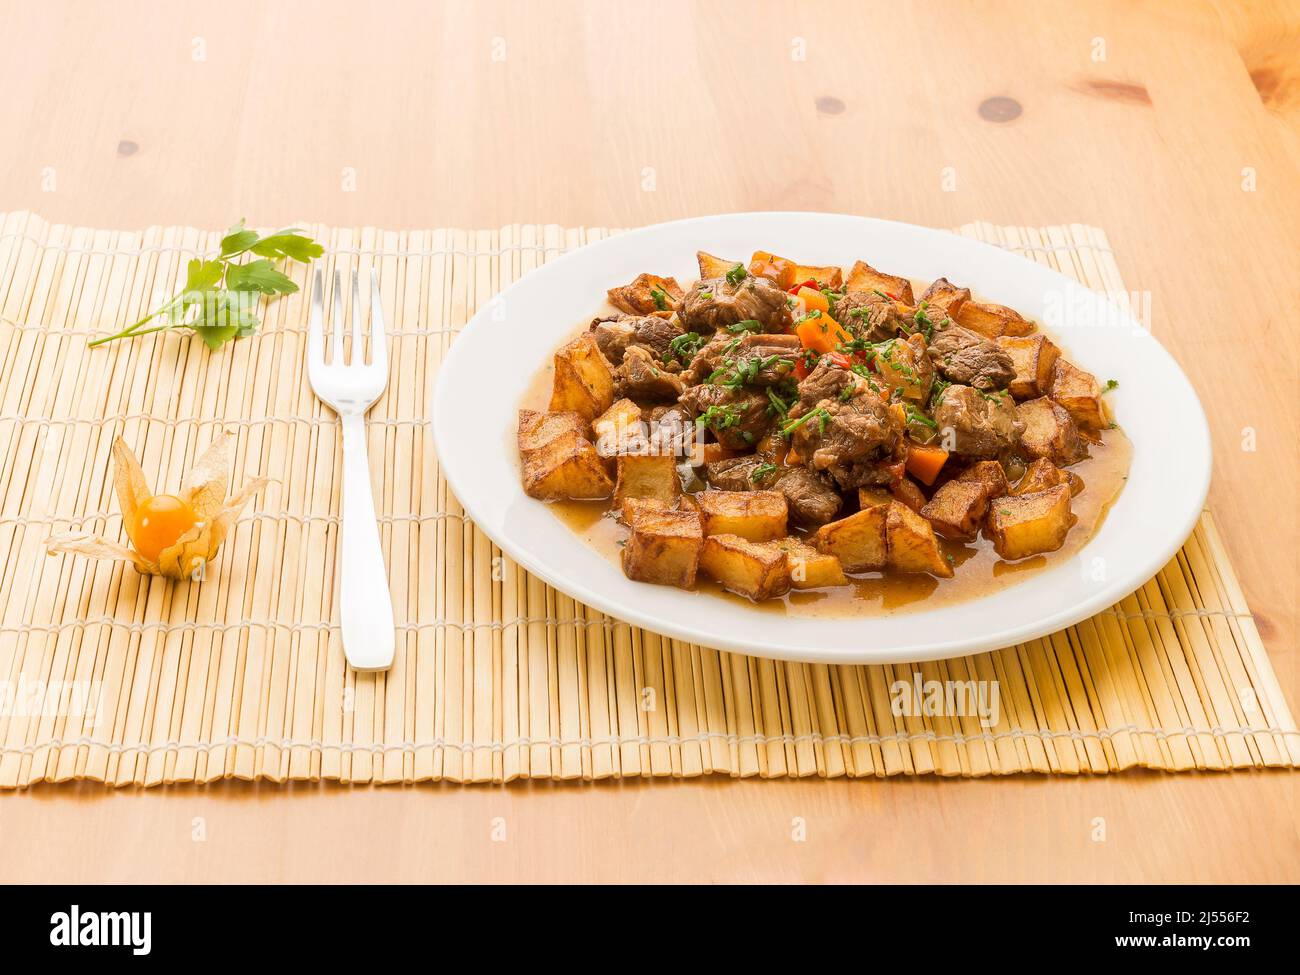 Typical Spanish food, meat stew with potatoes. Stock Photo